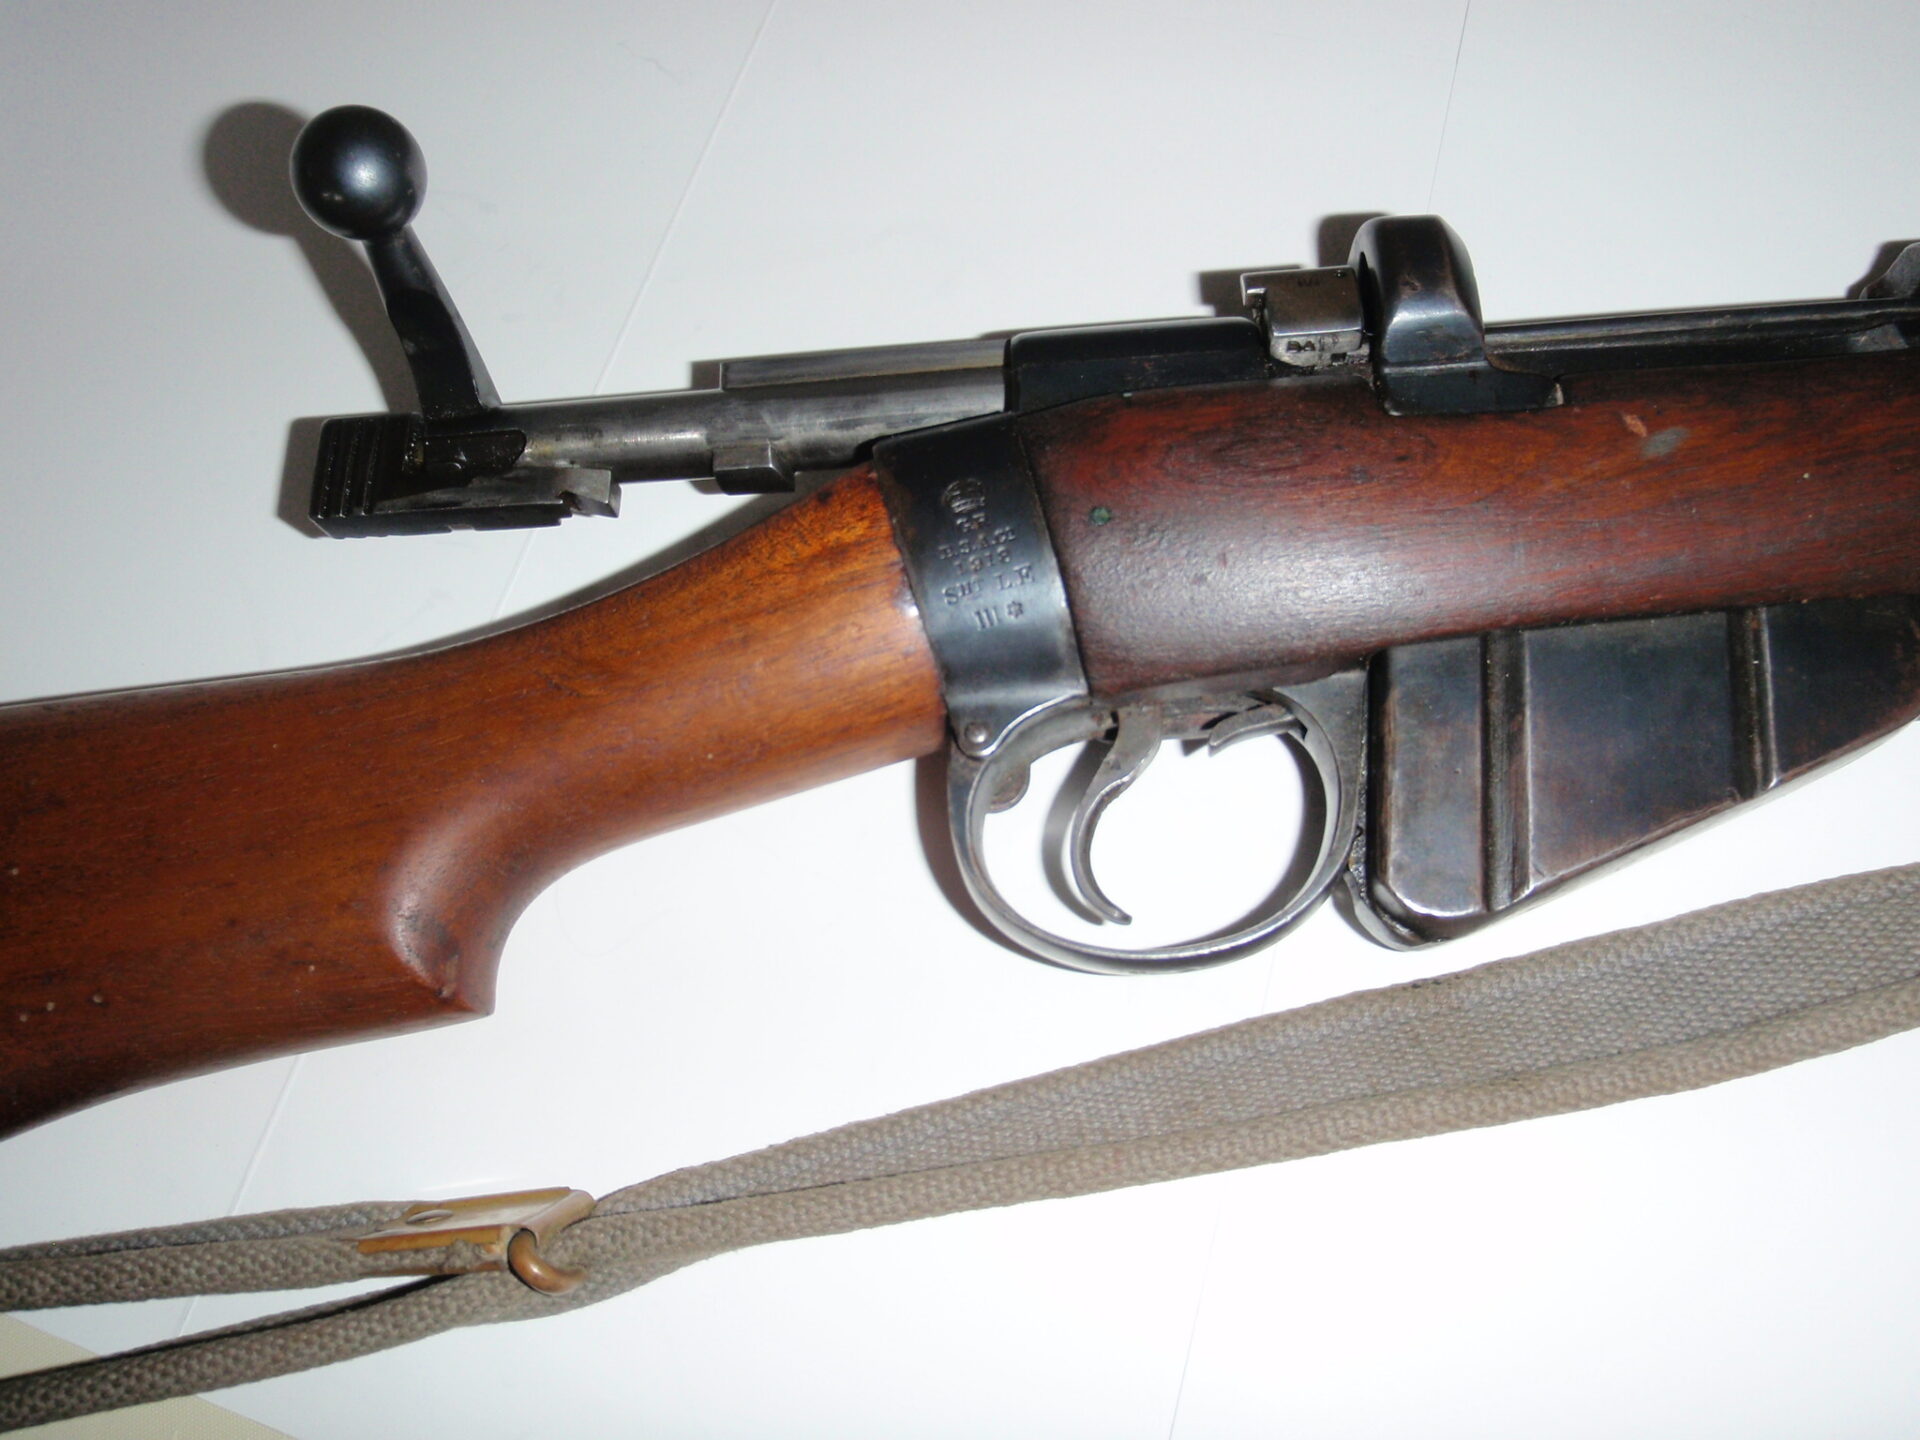 With bolt open, shows that this was made by BSA (British Small Arms factory)